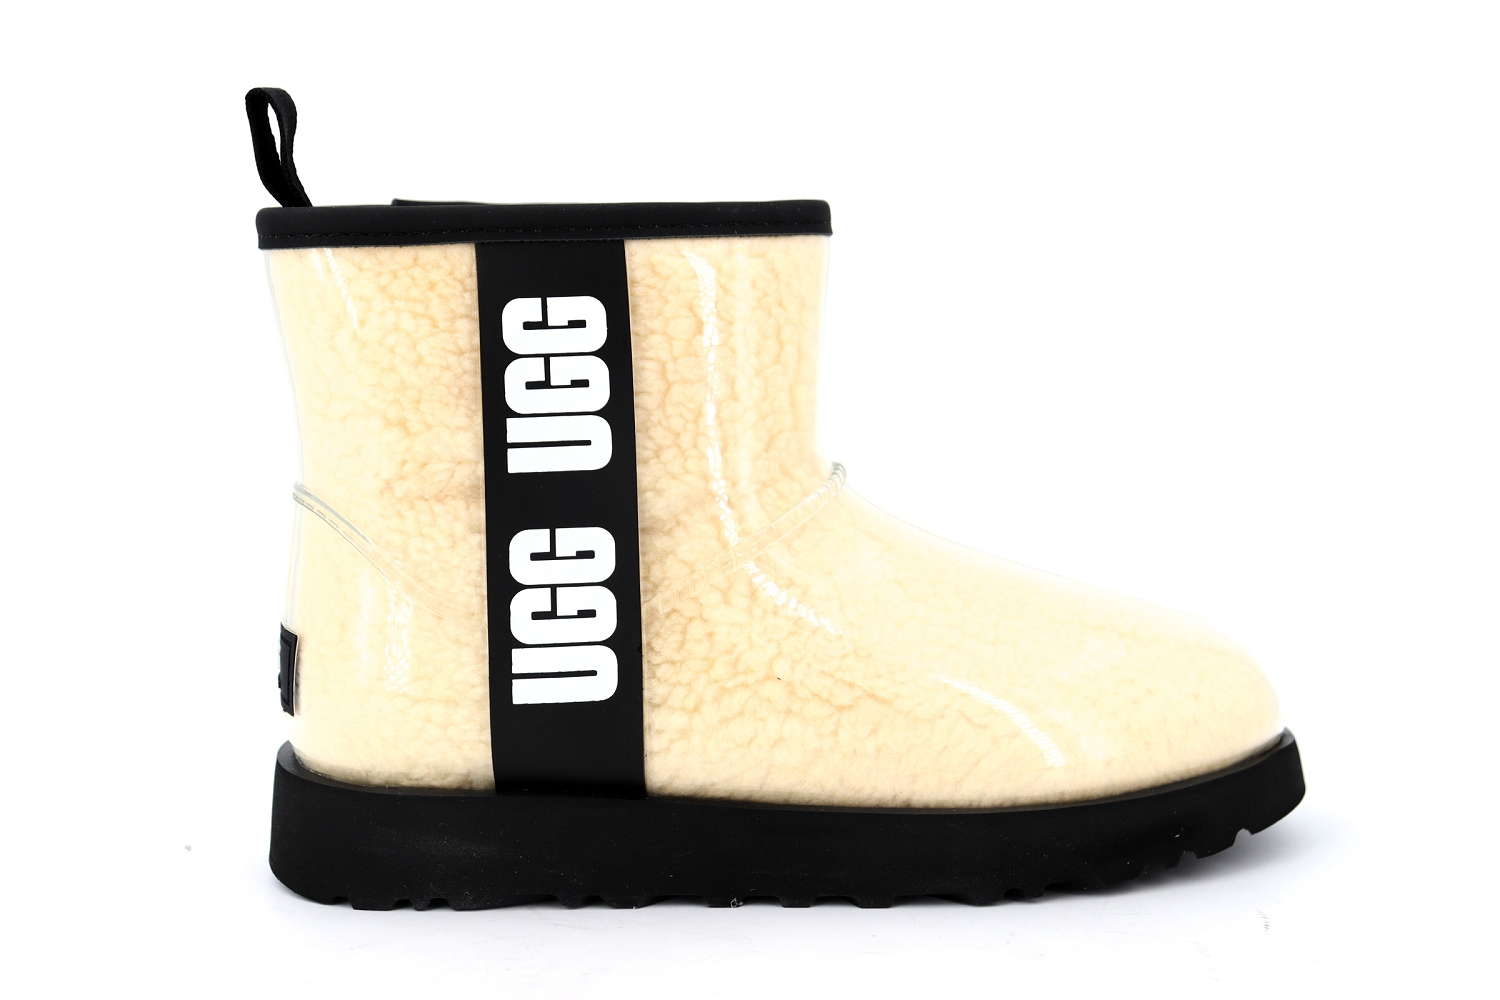 Chaussures Ugg classic clear mini synth tique imperm able femme